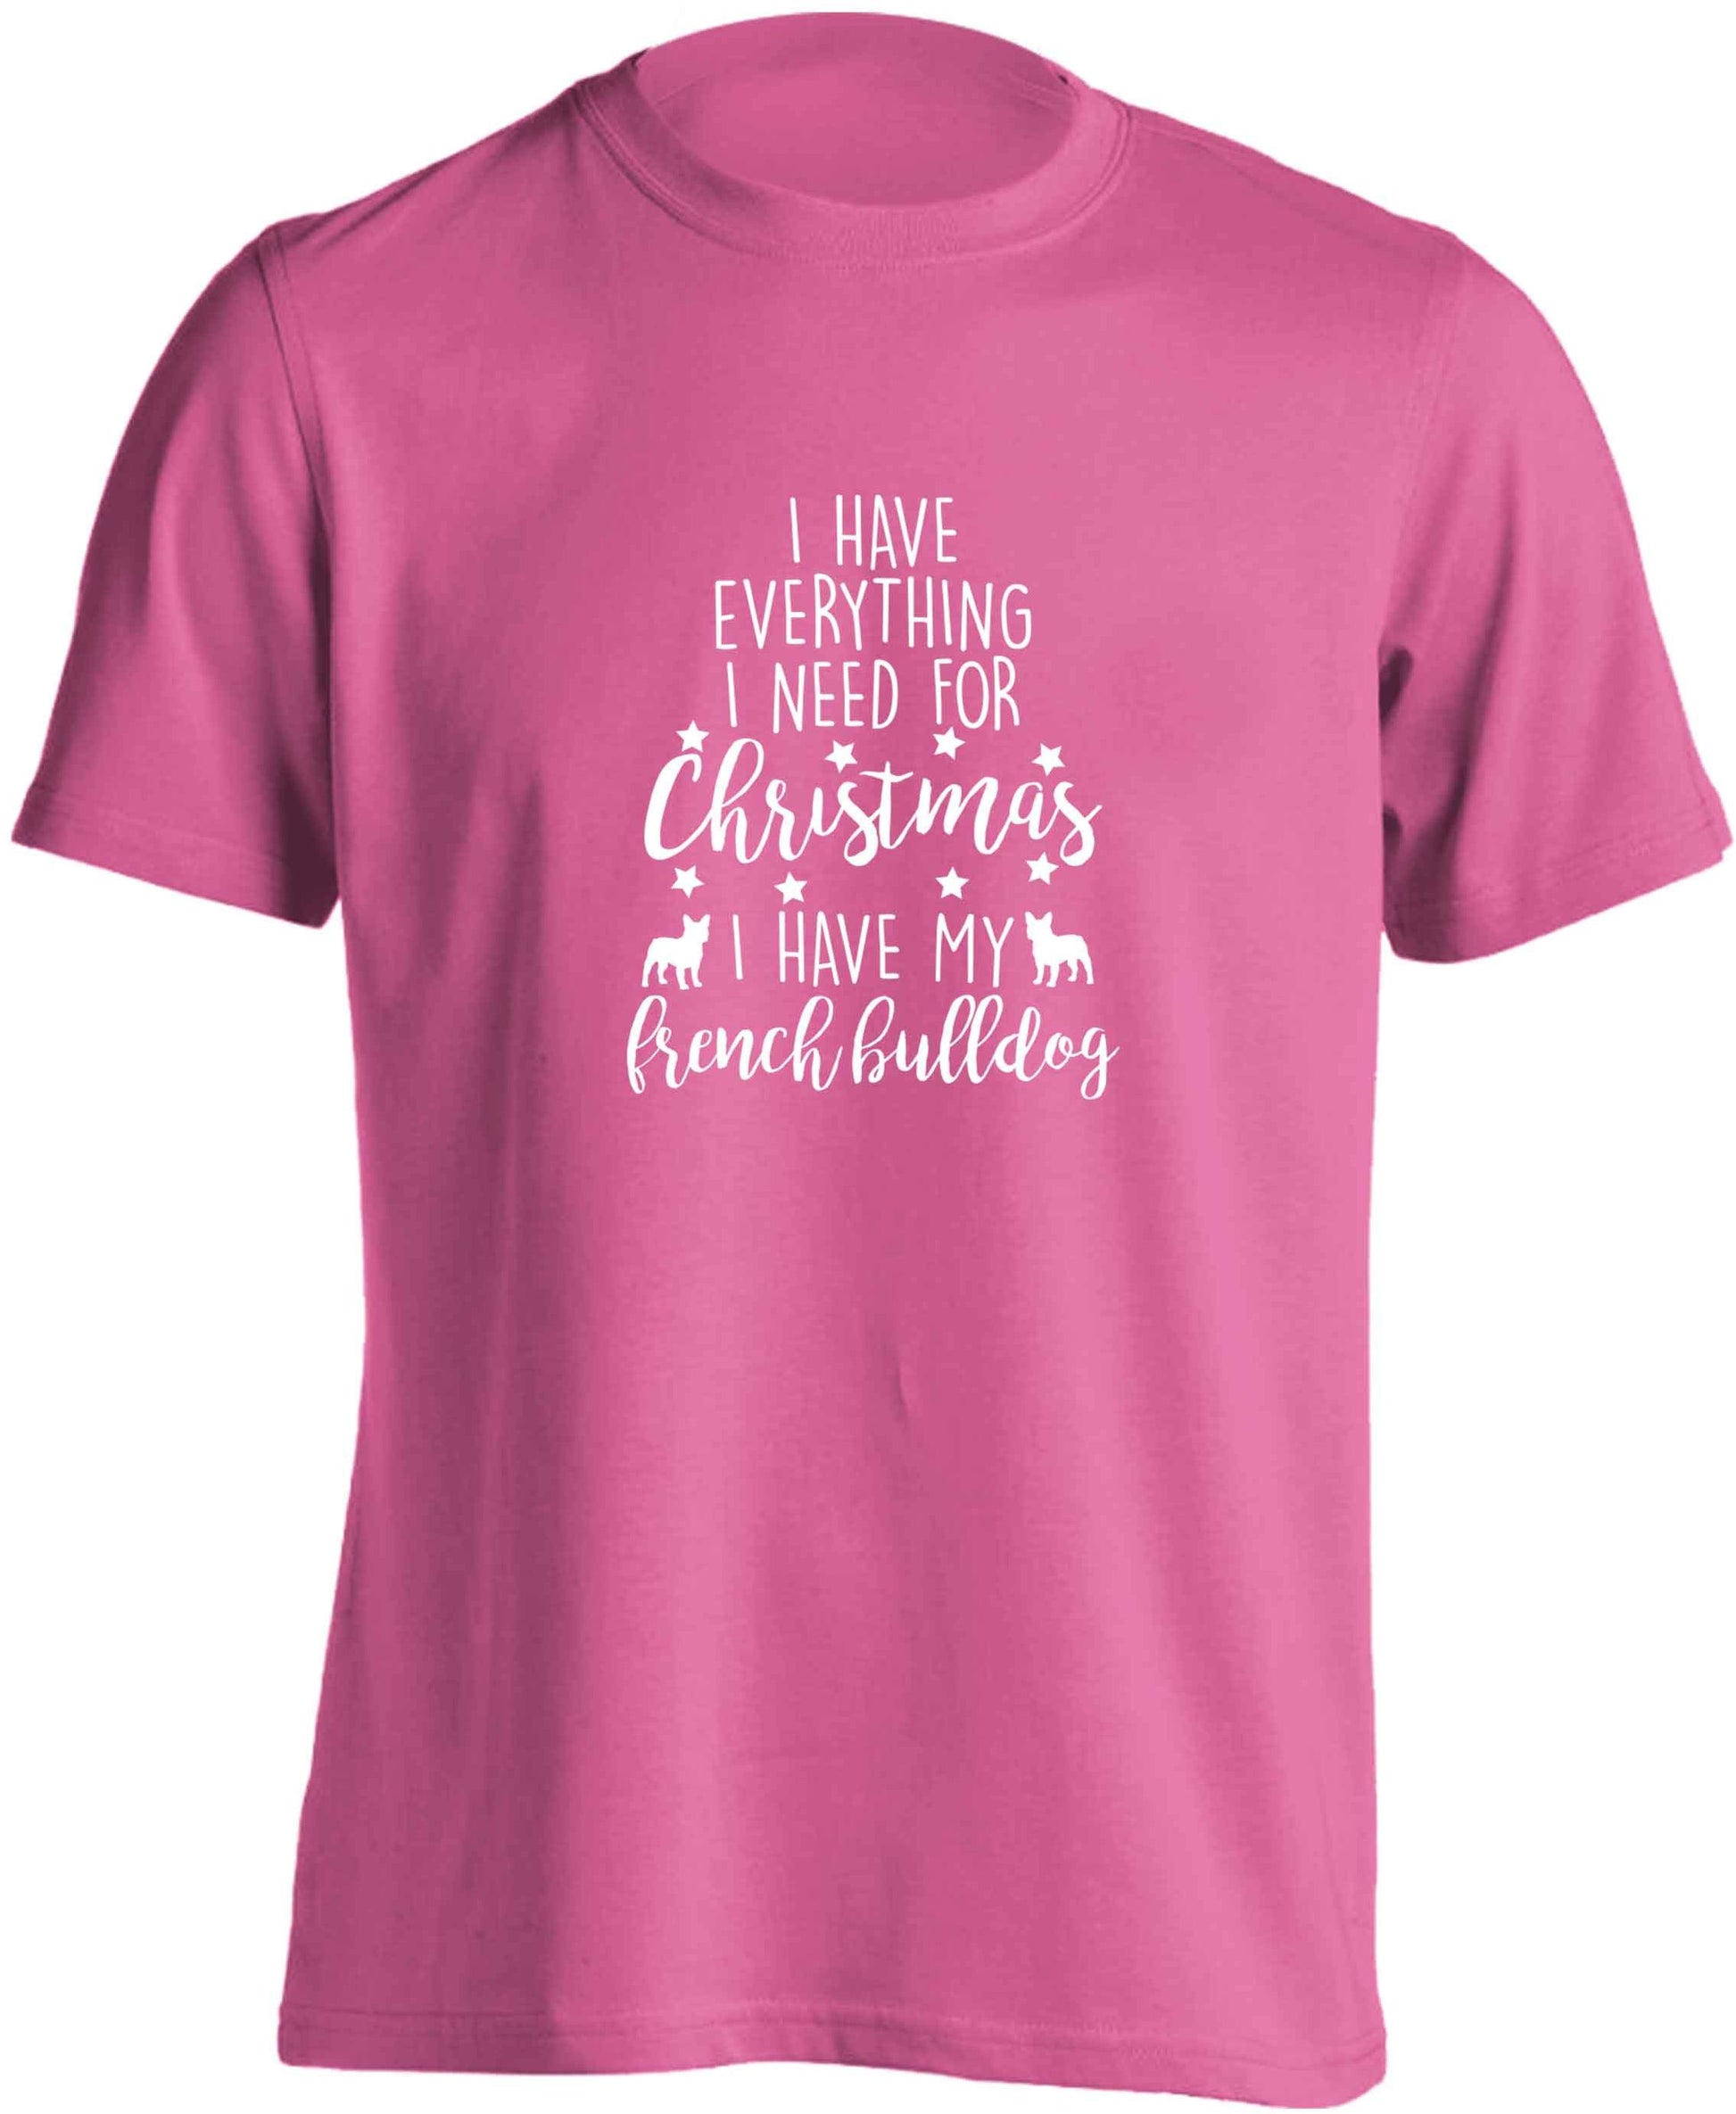 I have everything I need for Christmas I have my french bulldog adults unisex pink Tshirt 2XL